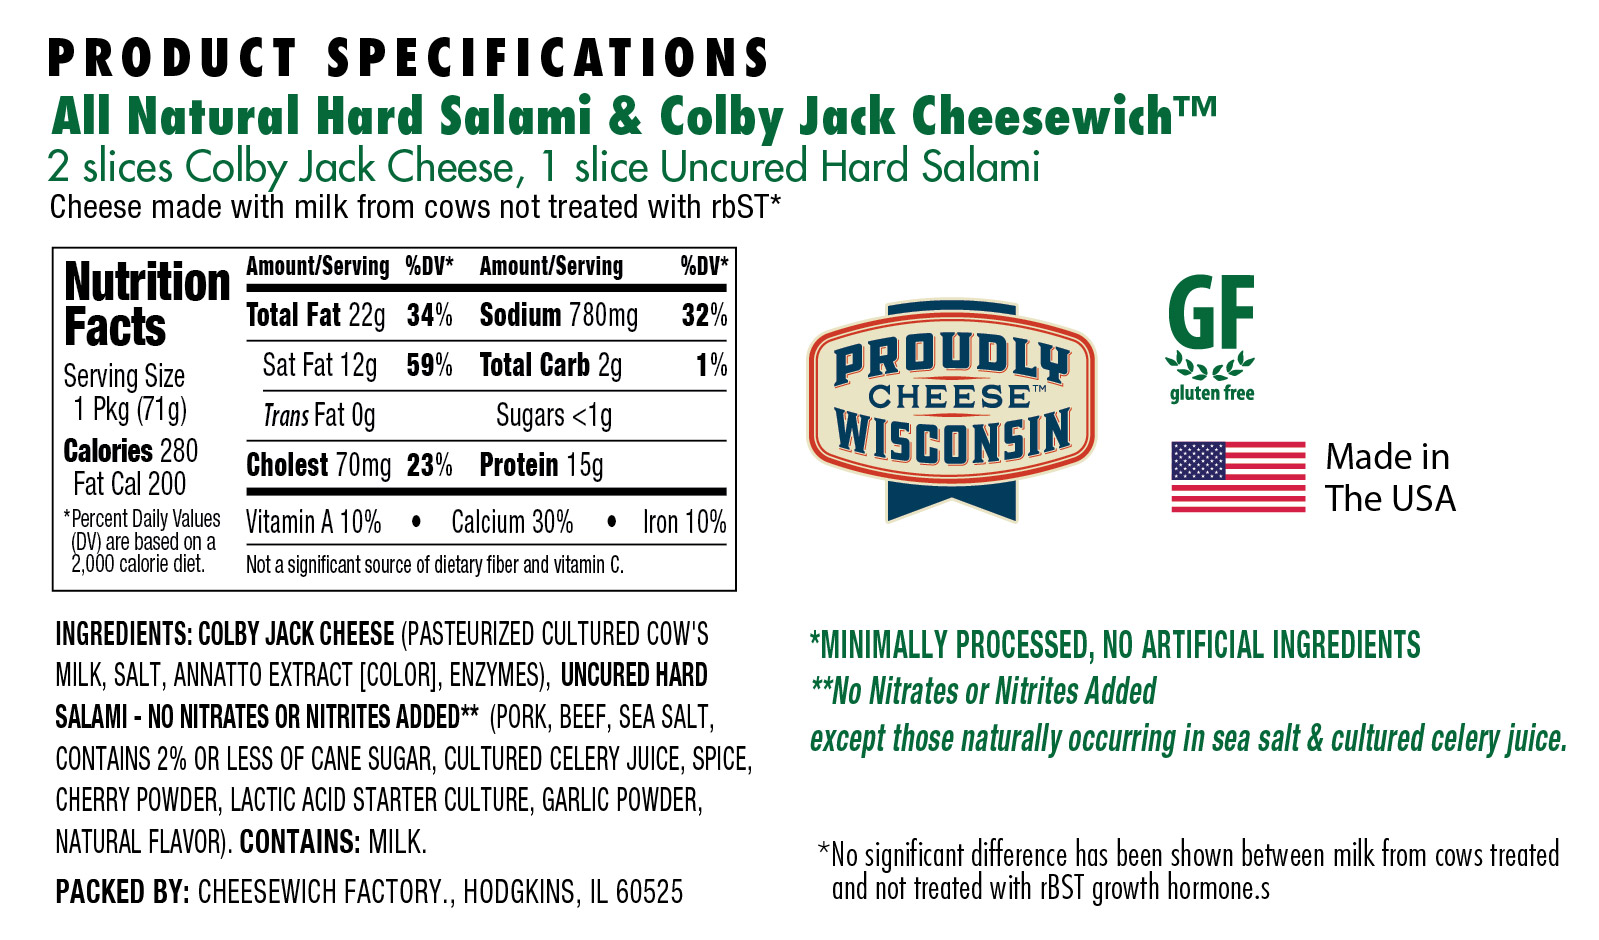 nutrition and ingredients for all natural uncured hard salami and colby jack cheese.